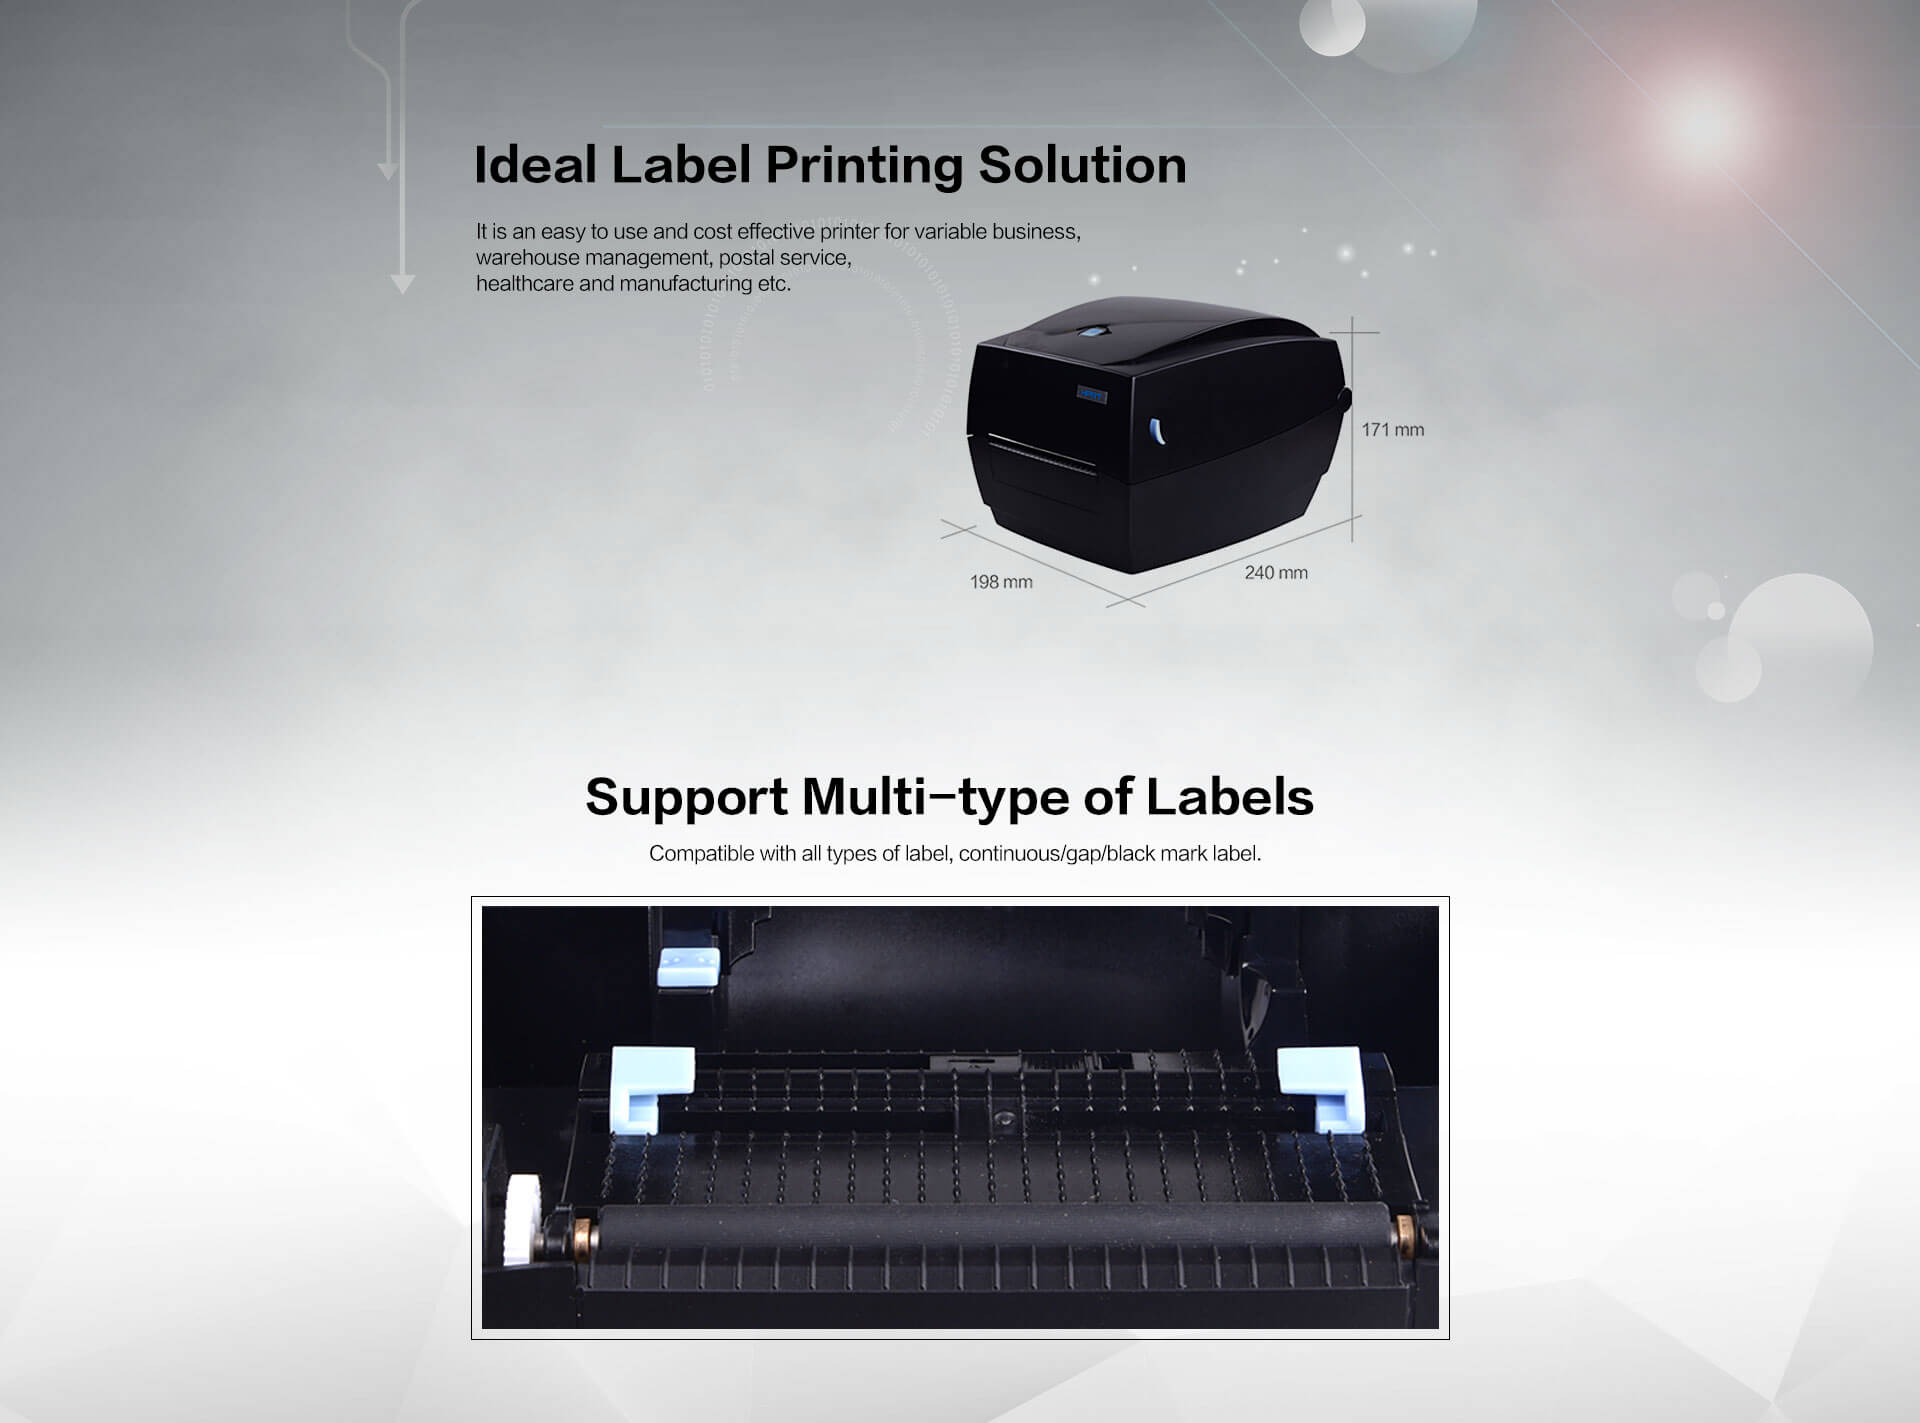 HPRT HT100 HT130 label printing solution